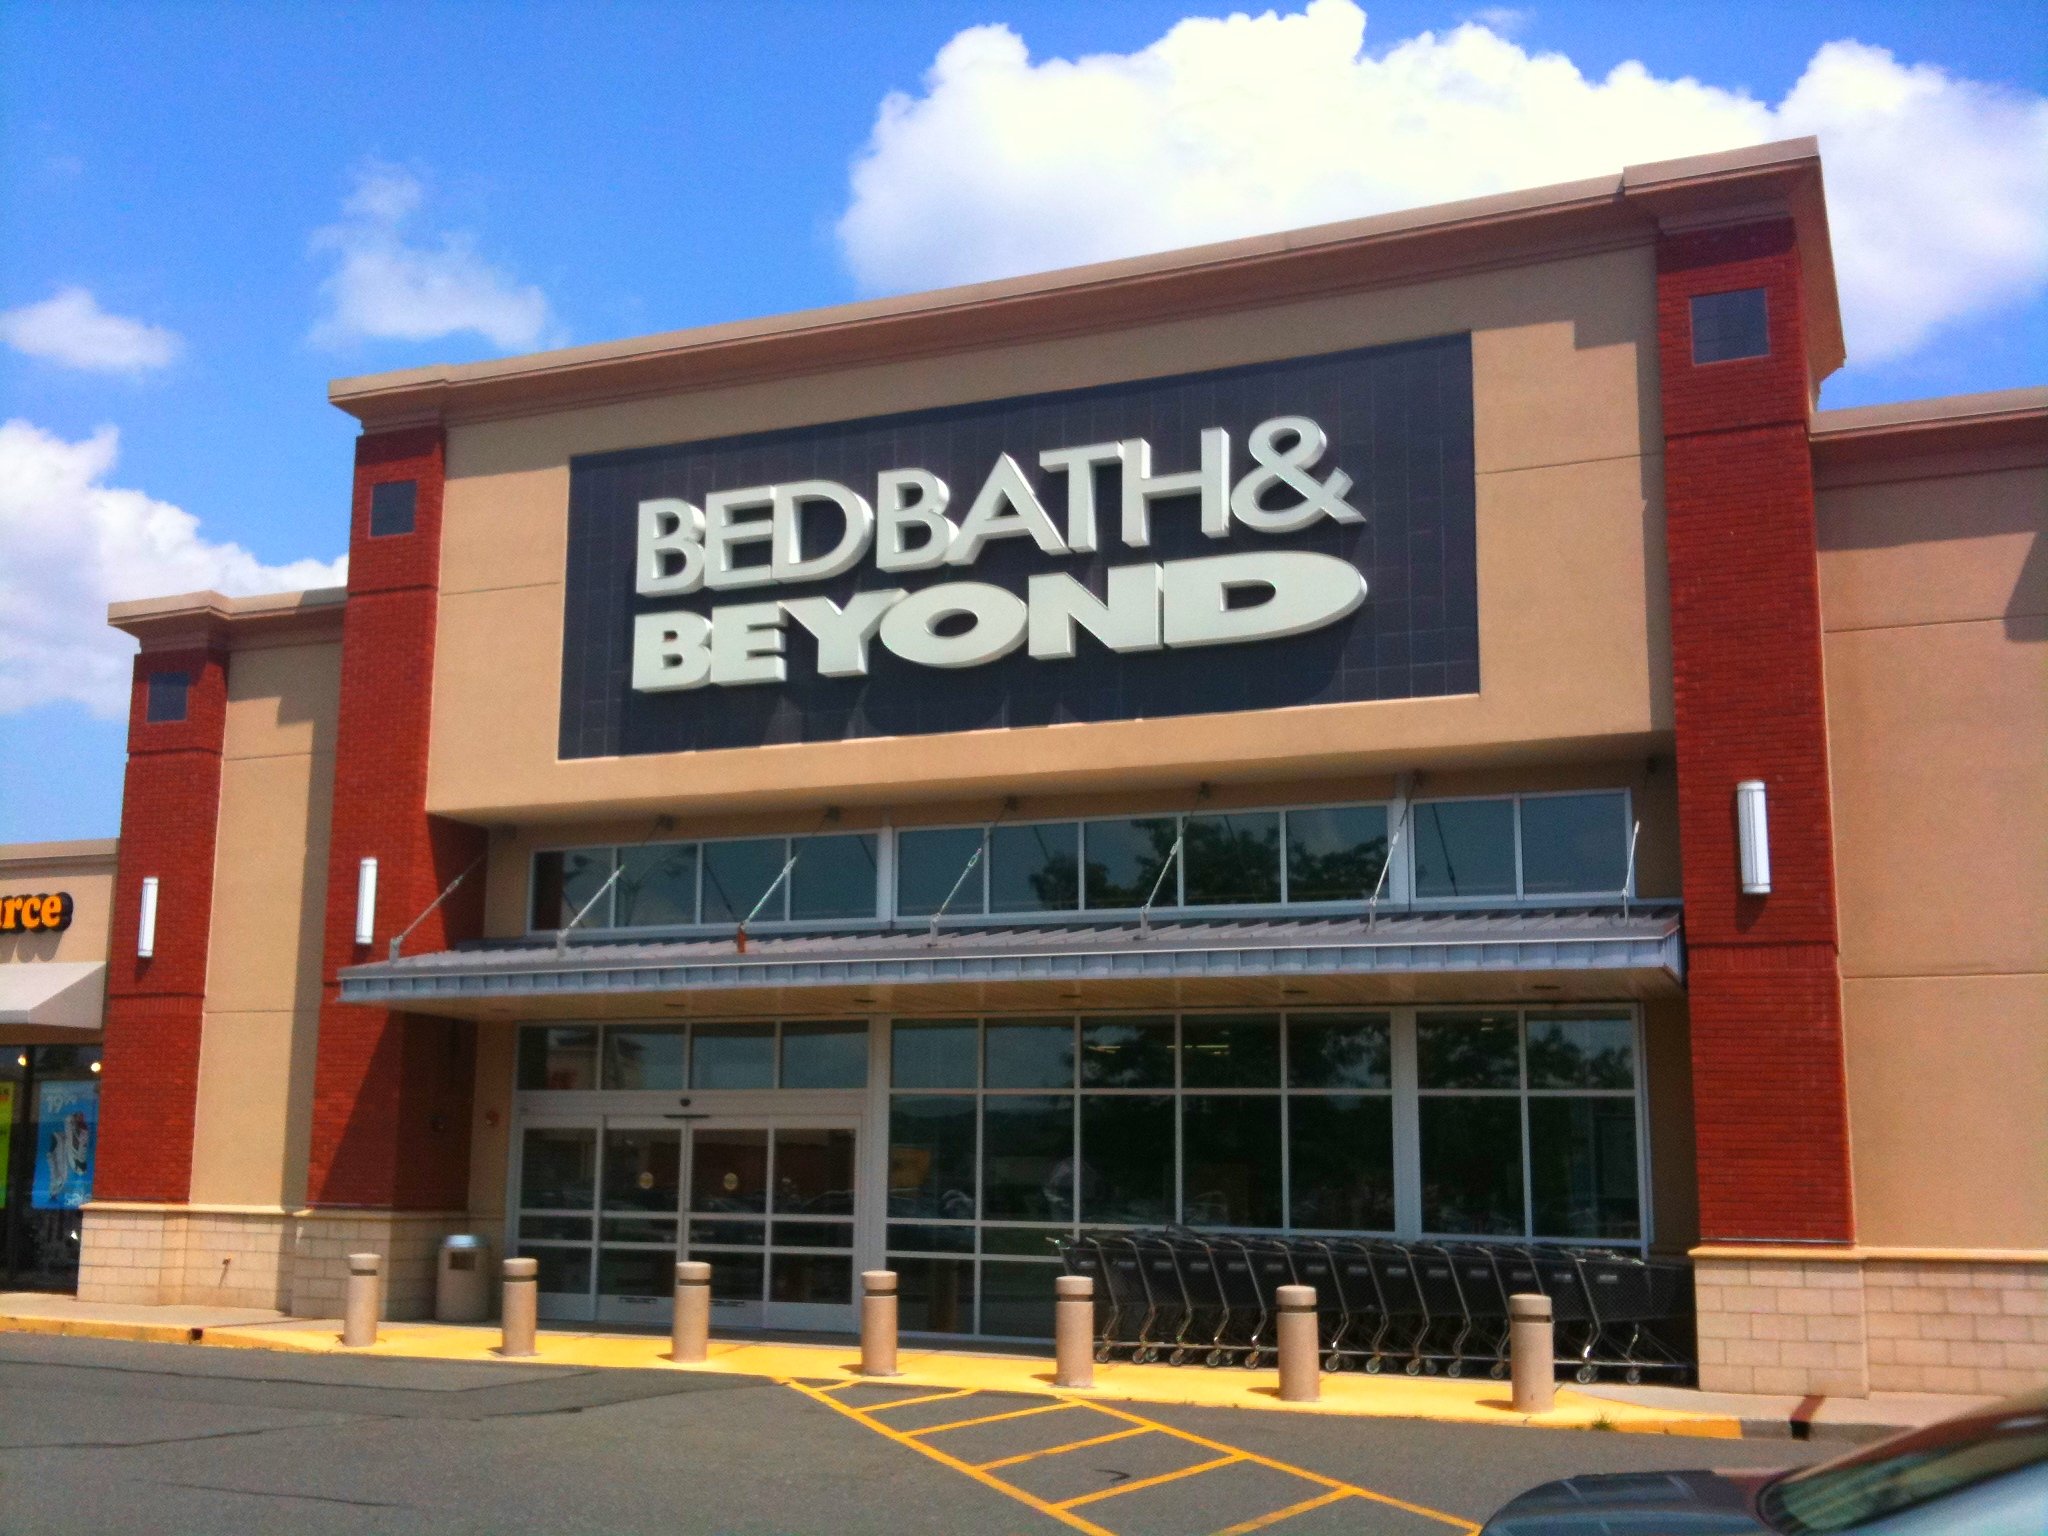 bed bath and beyond near me